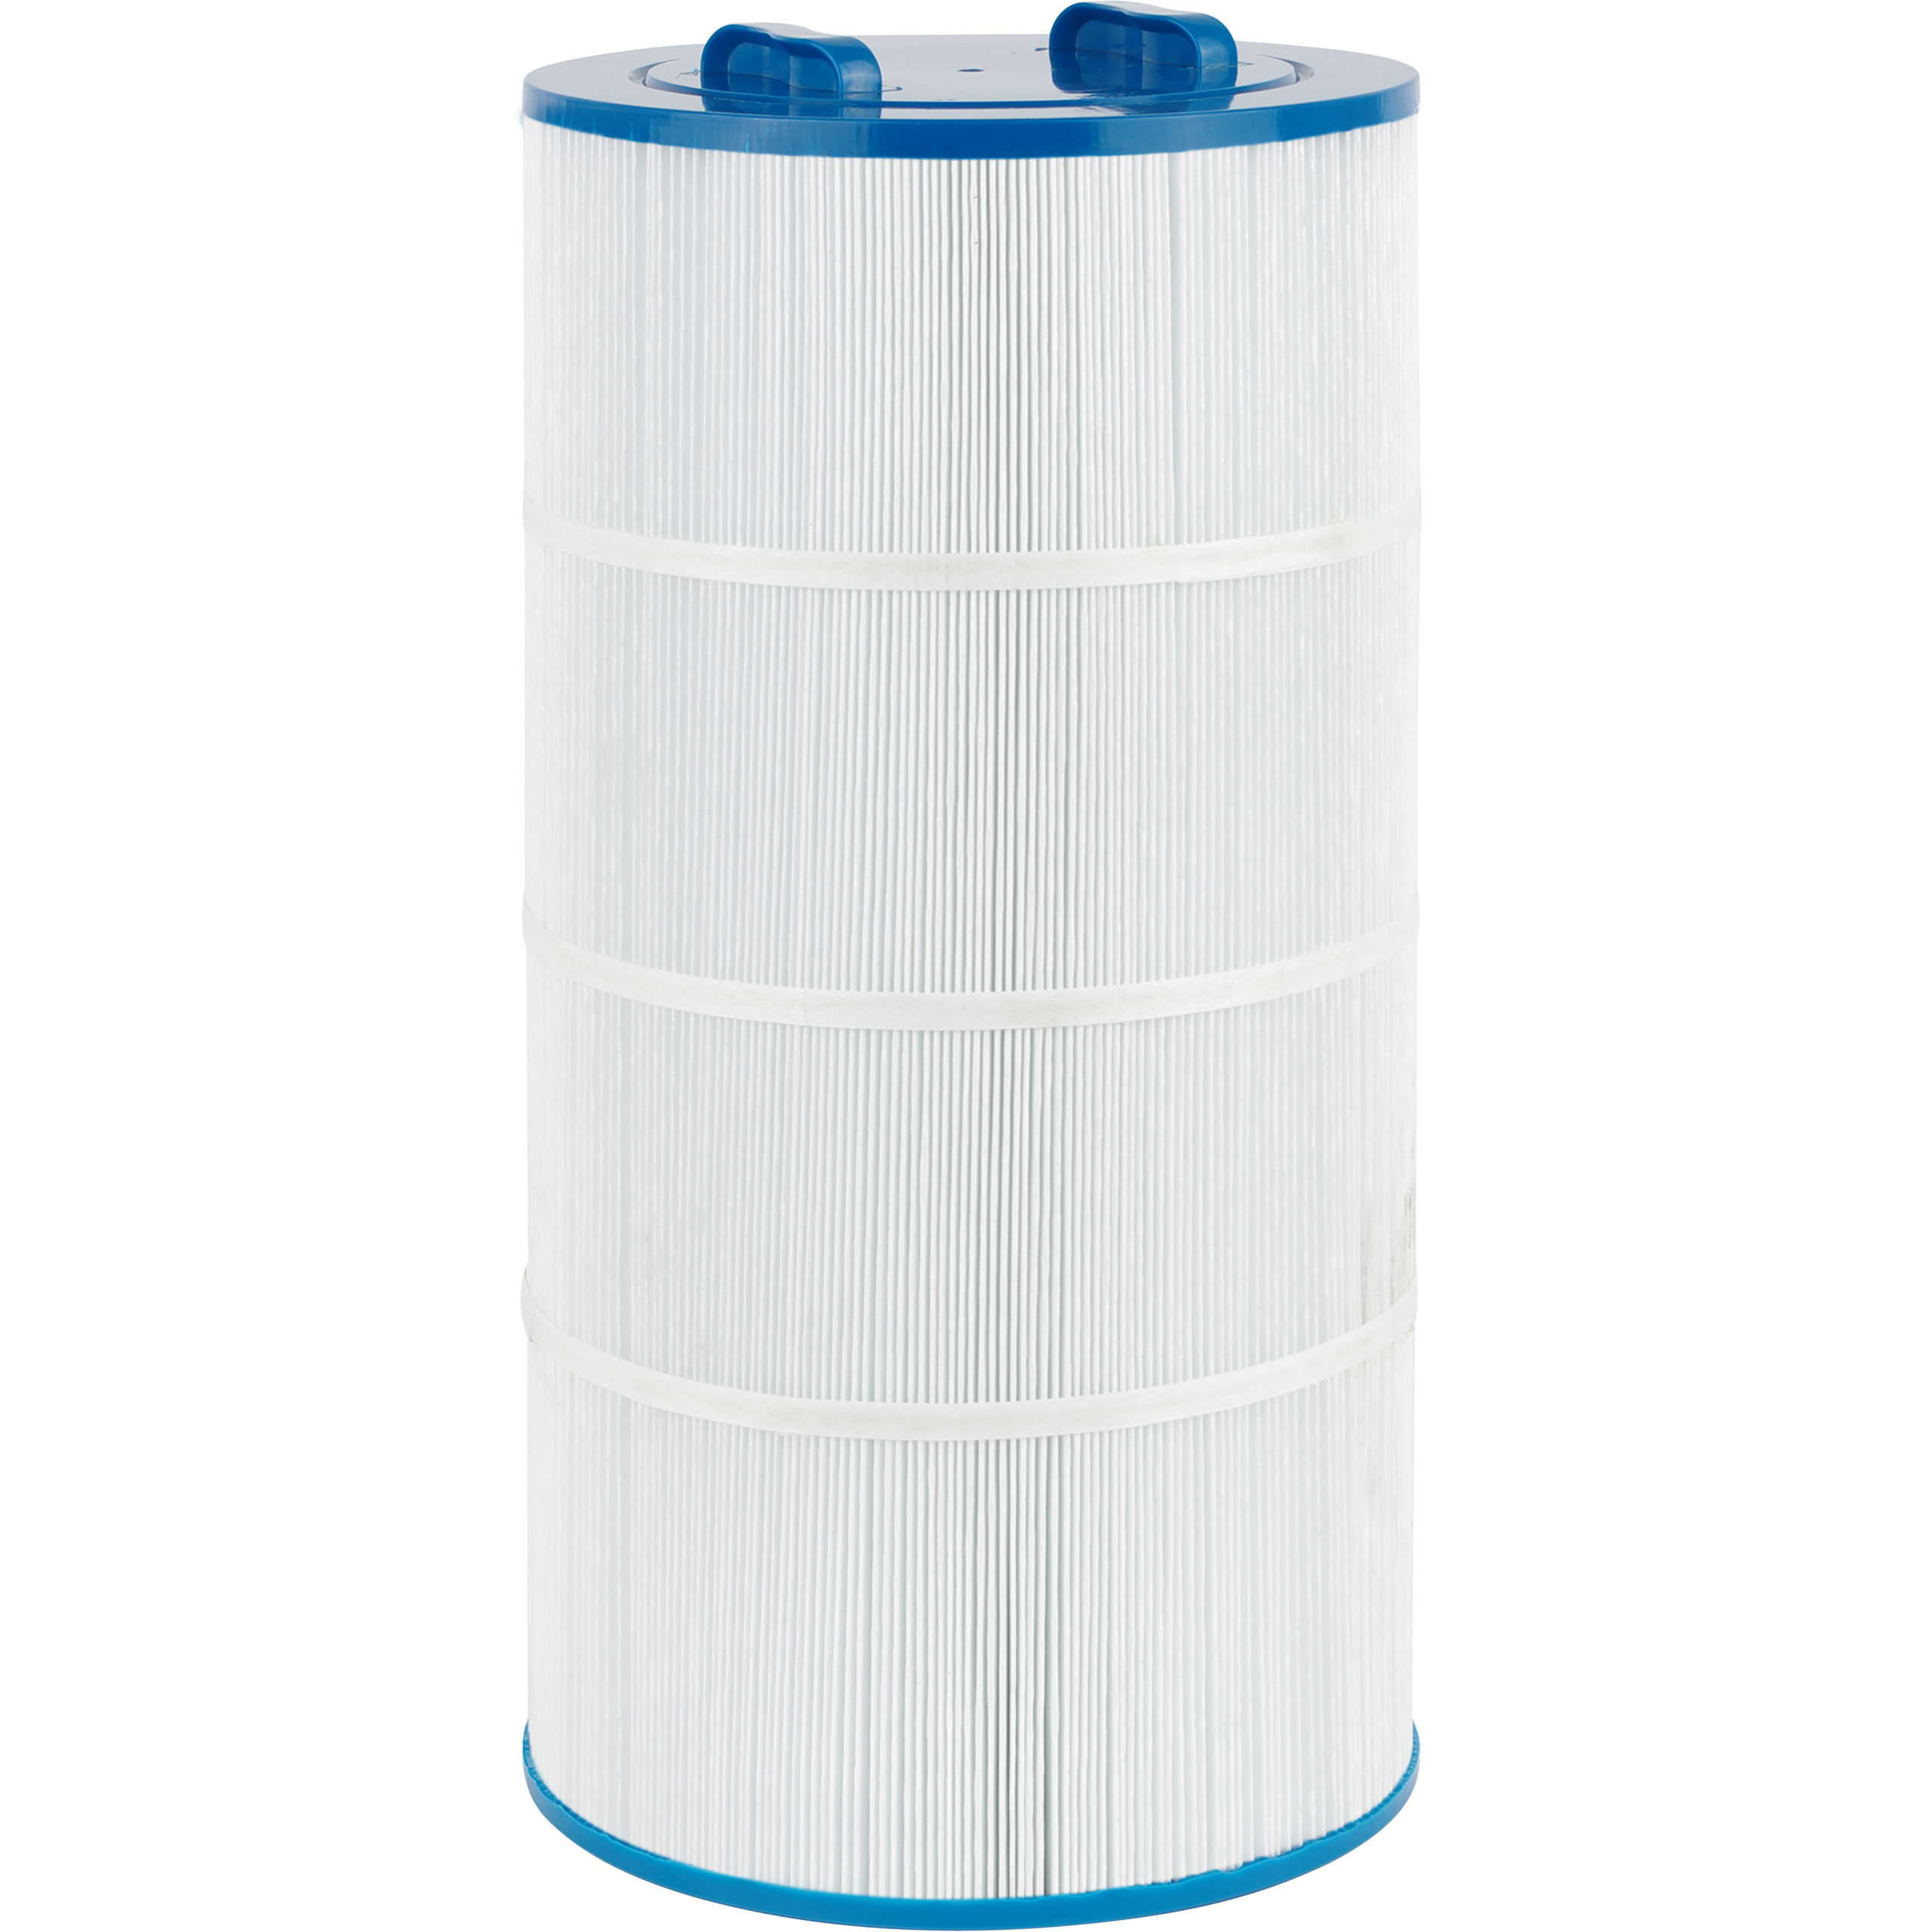 Unicel C-9481 Compatible Hot Tub Spa Filter - $56.00